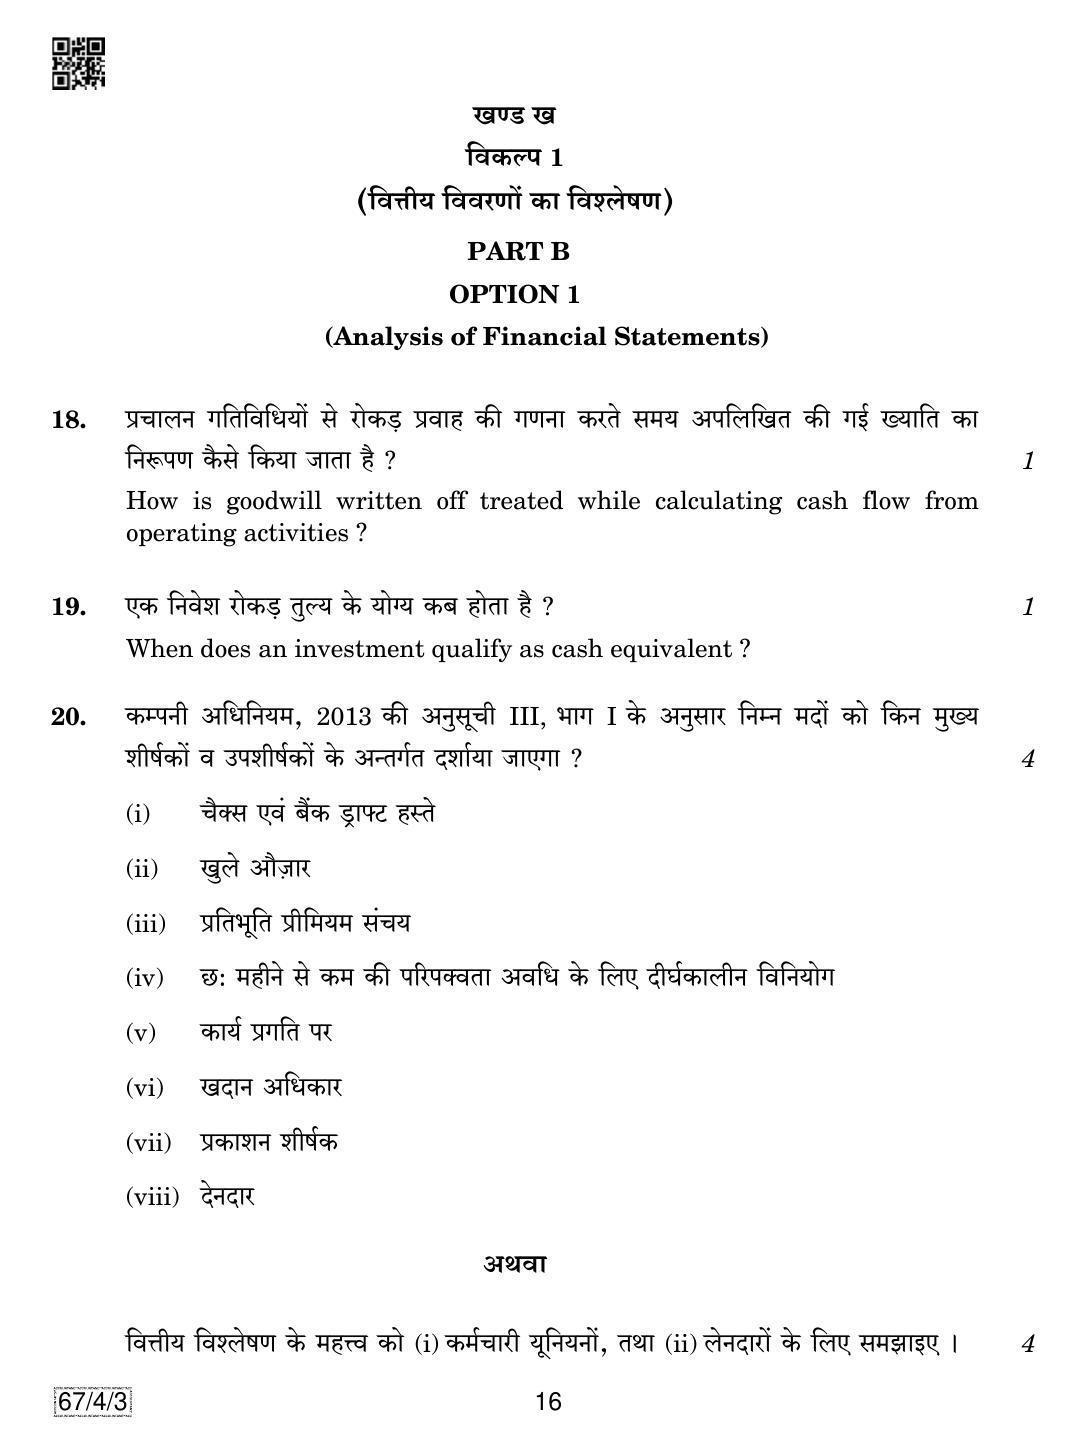 CBSE Class 12 67-4-3 Accountancy 2019 Question Paper - Page 16